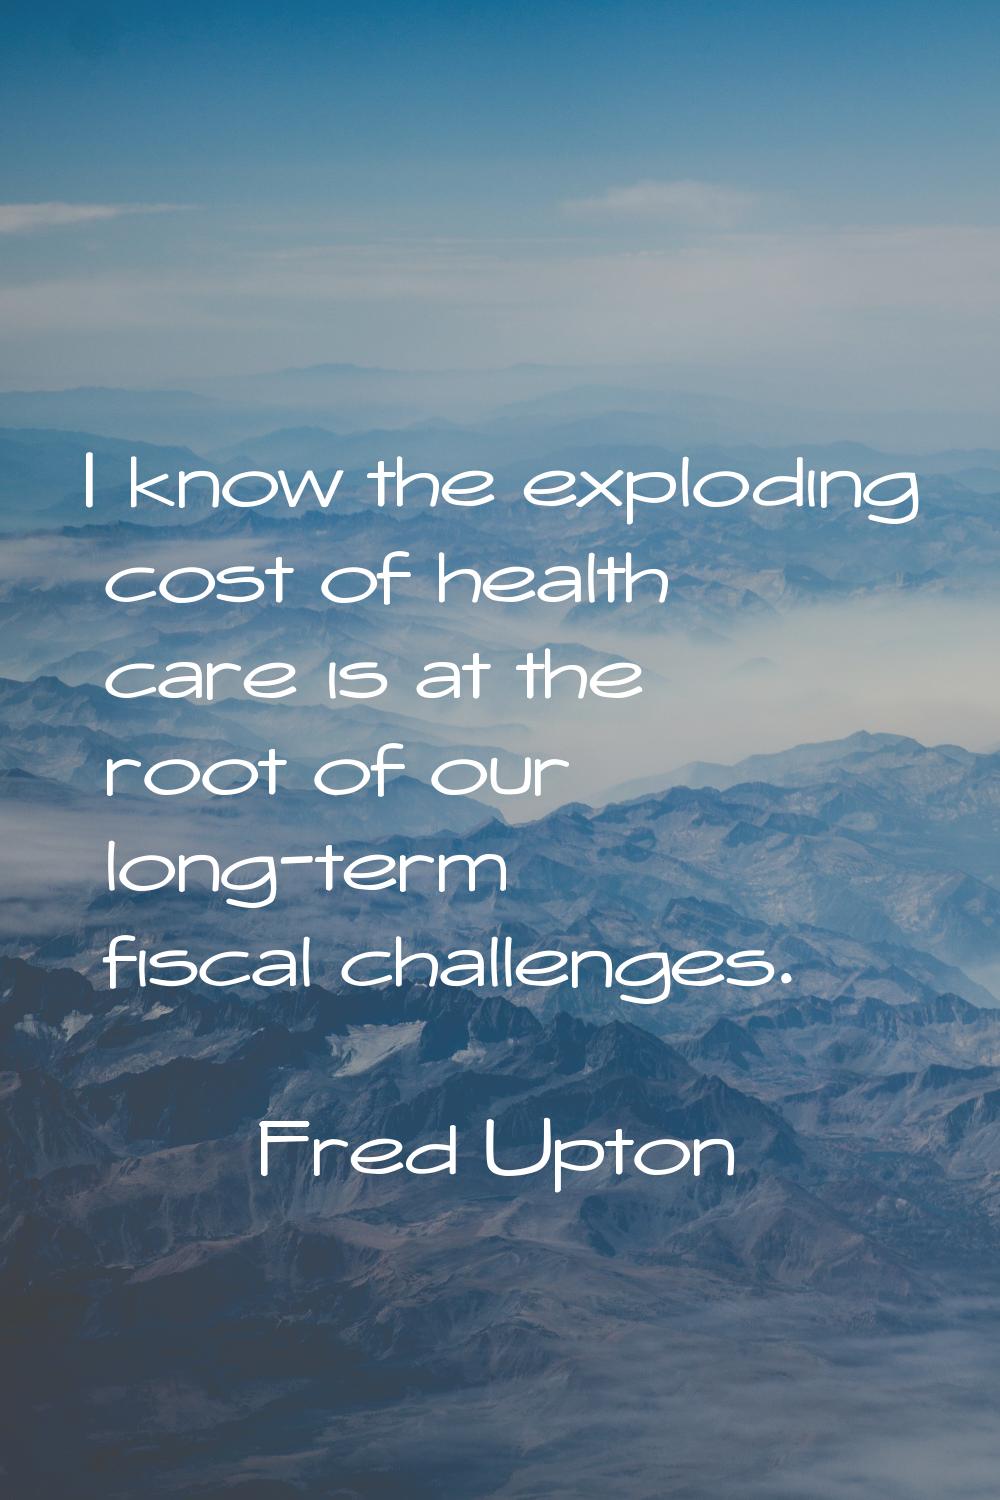 I know the exploding cost of health care is at the root of our long-term fiscal challenges.